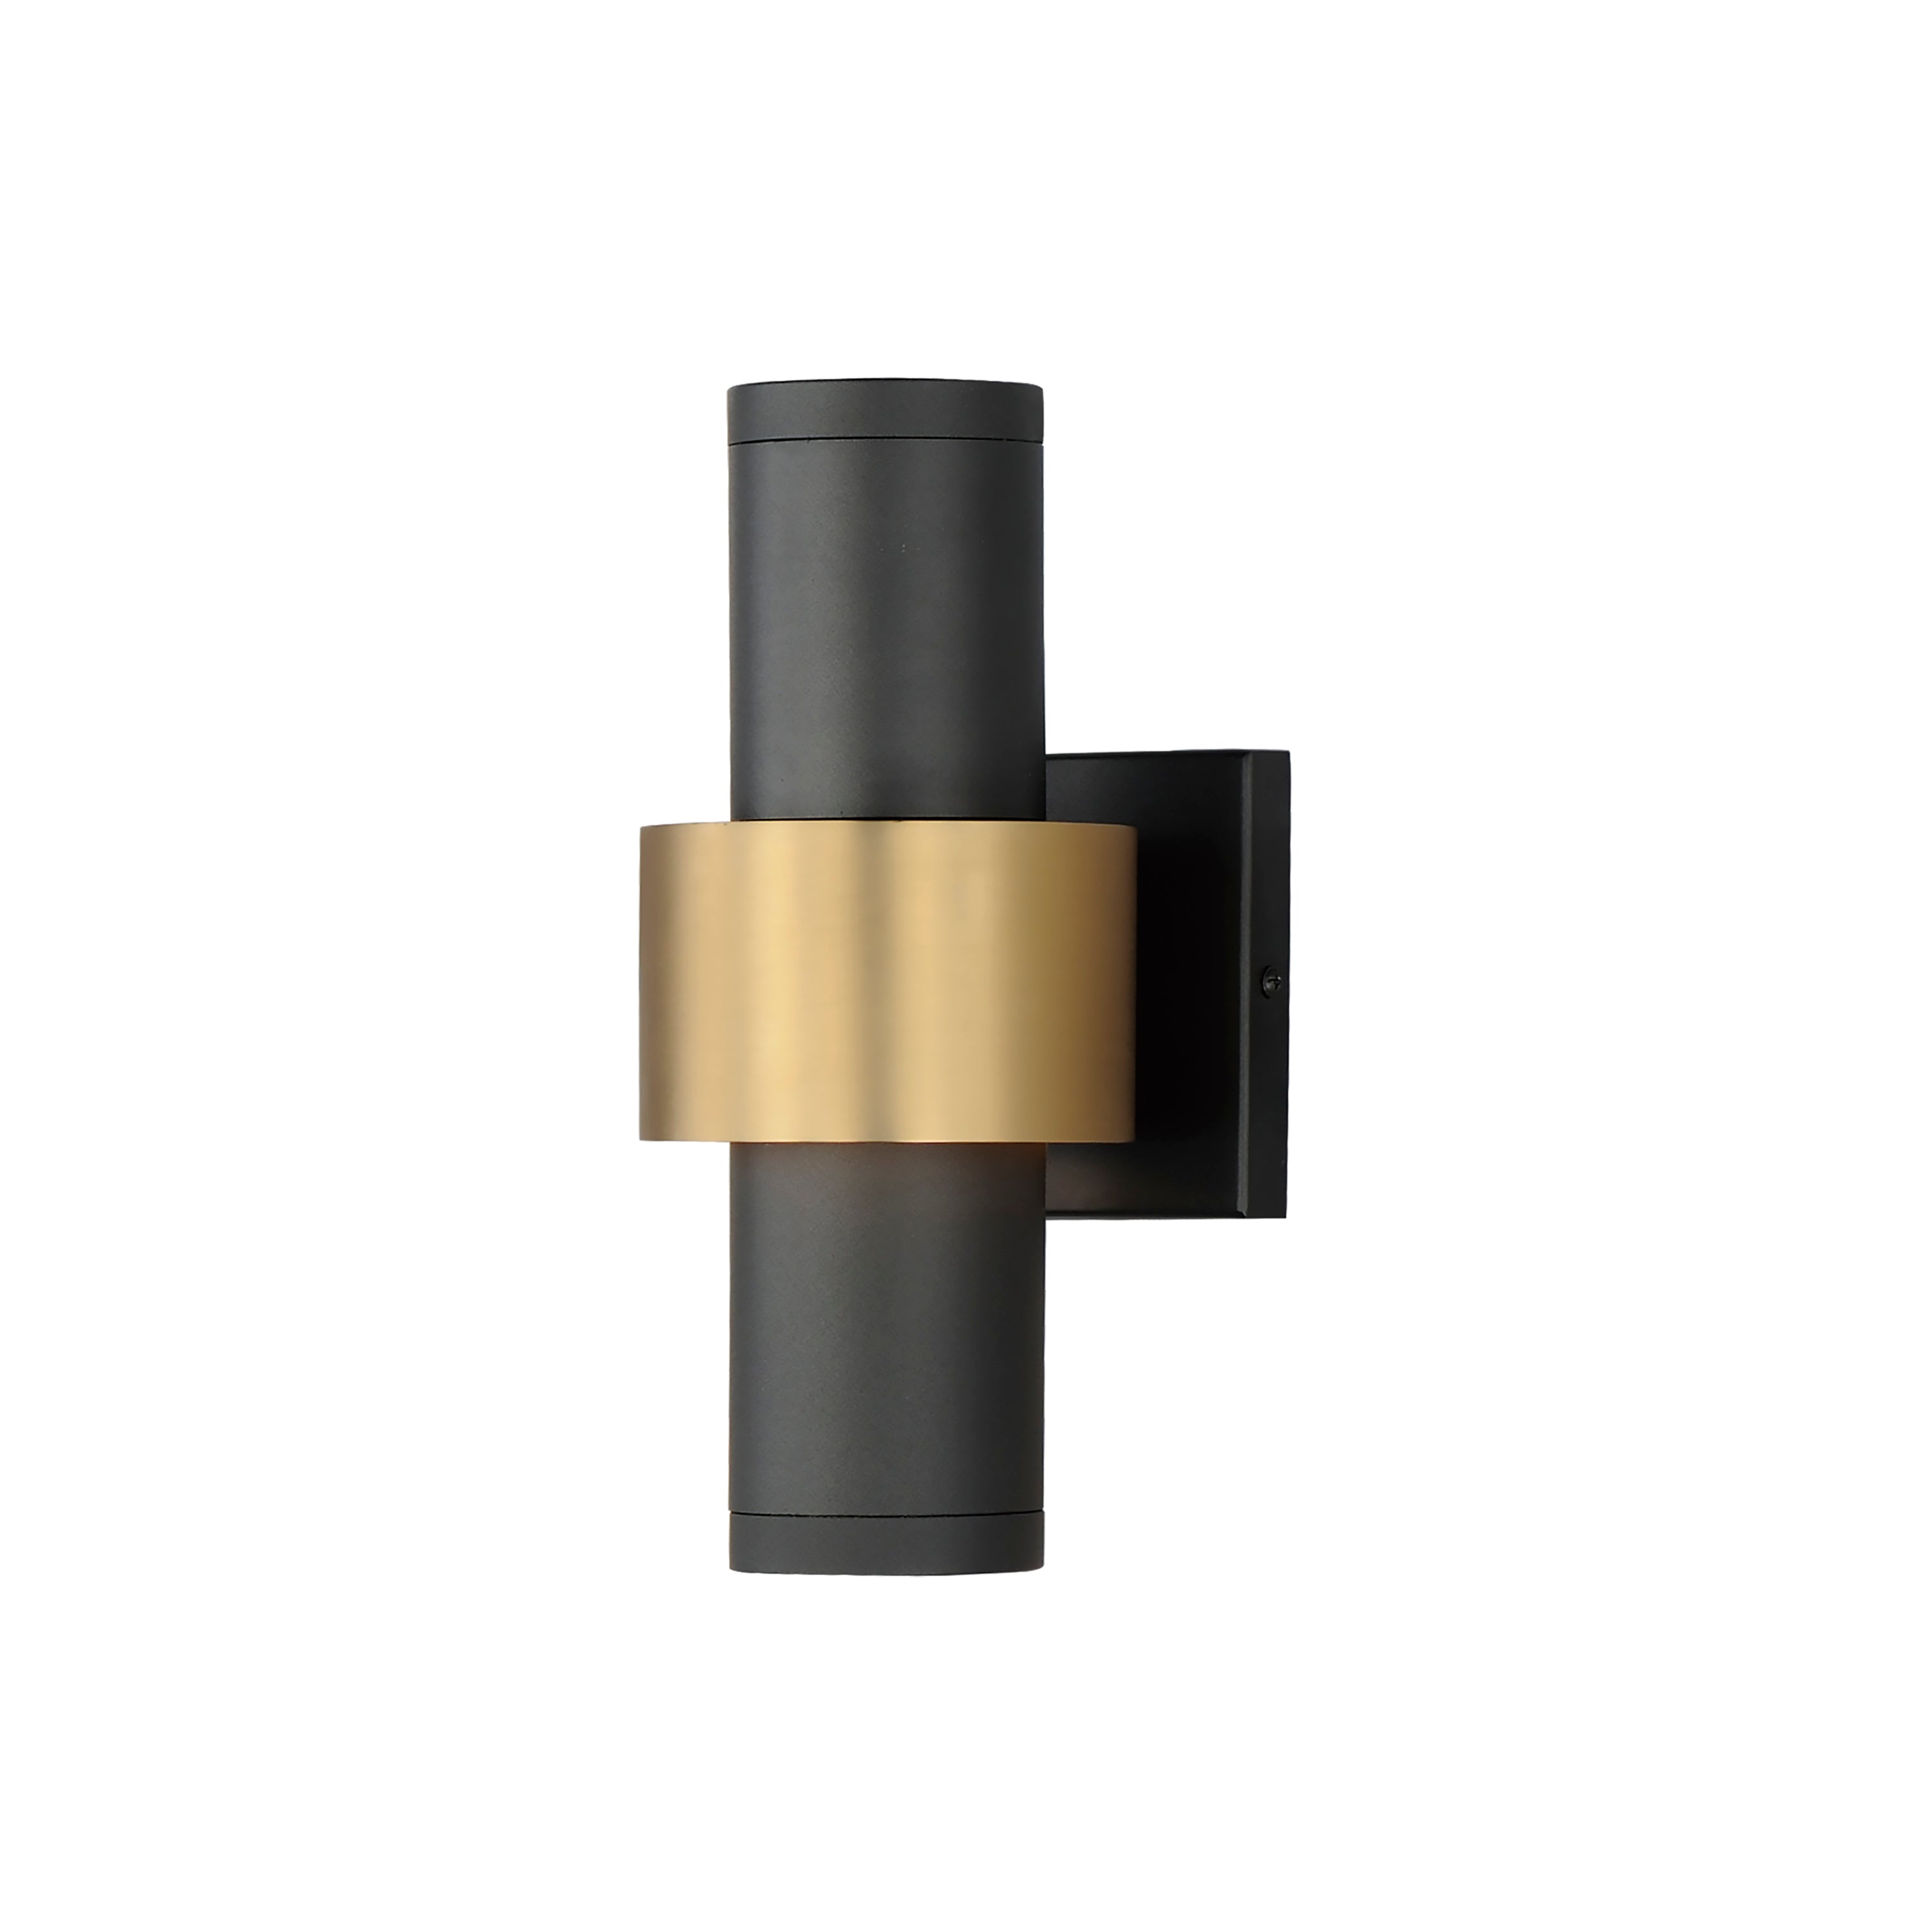 Reveal Outdoor-Outdoor Wall Mount Outdoor l Wall ET2 x5x12 Black / Gold 